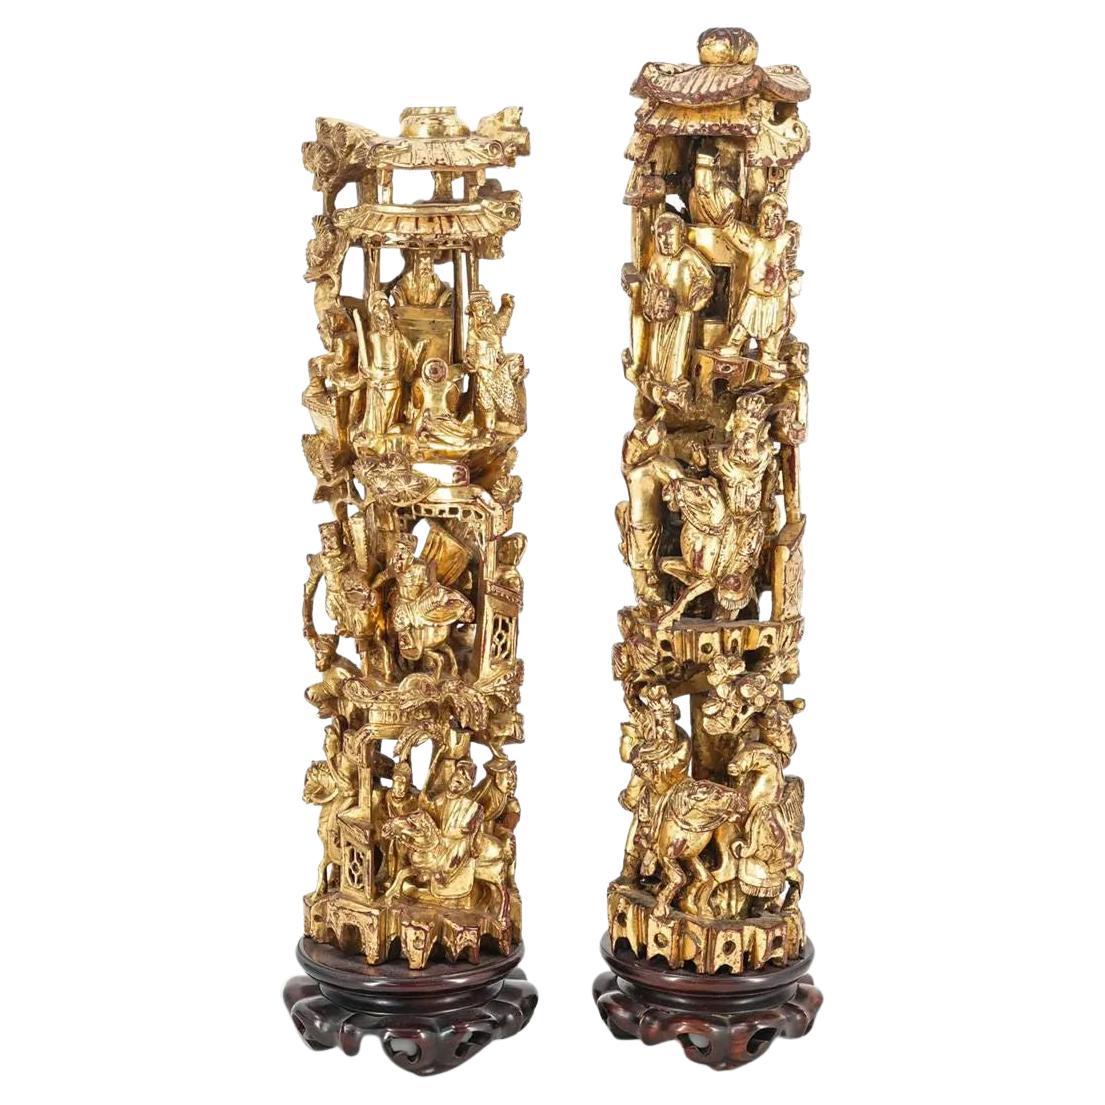 Chinese Carved Giltwood Tower Table Ornaments